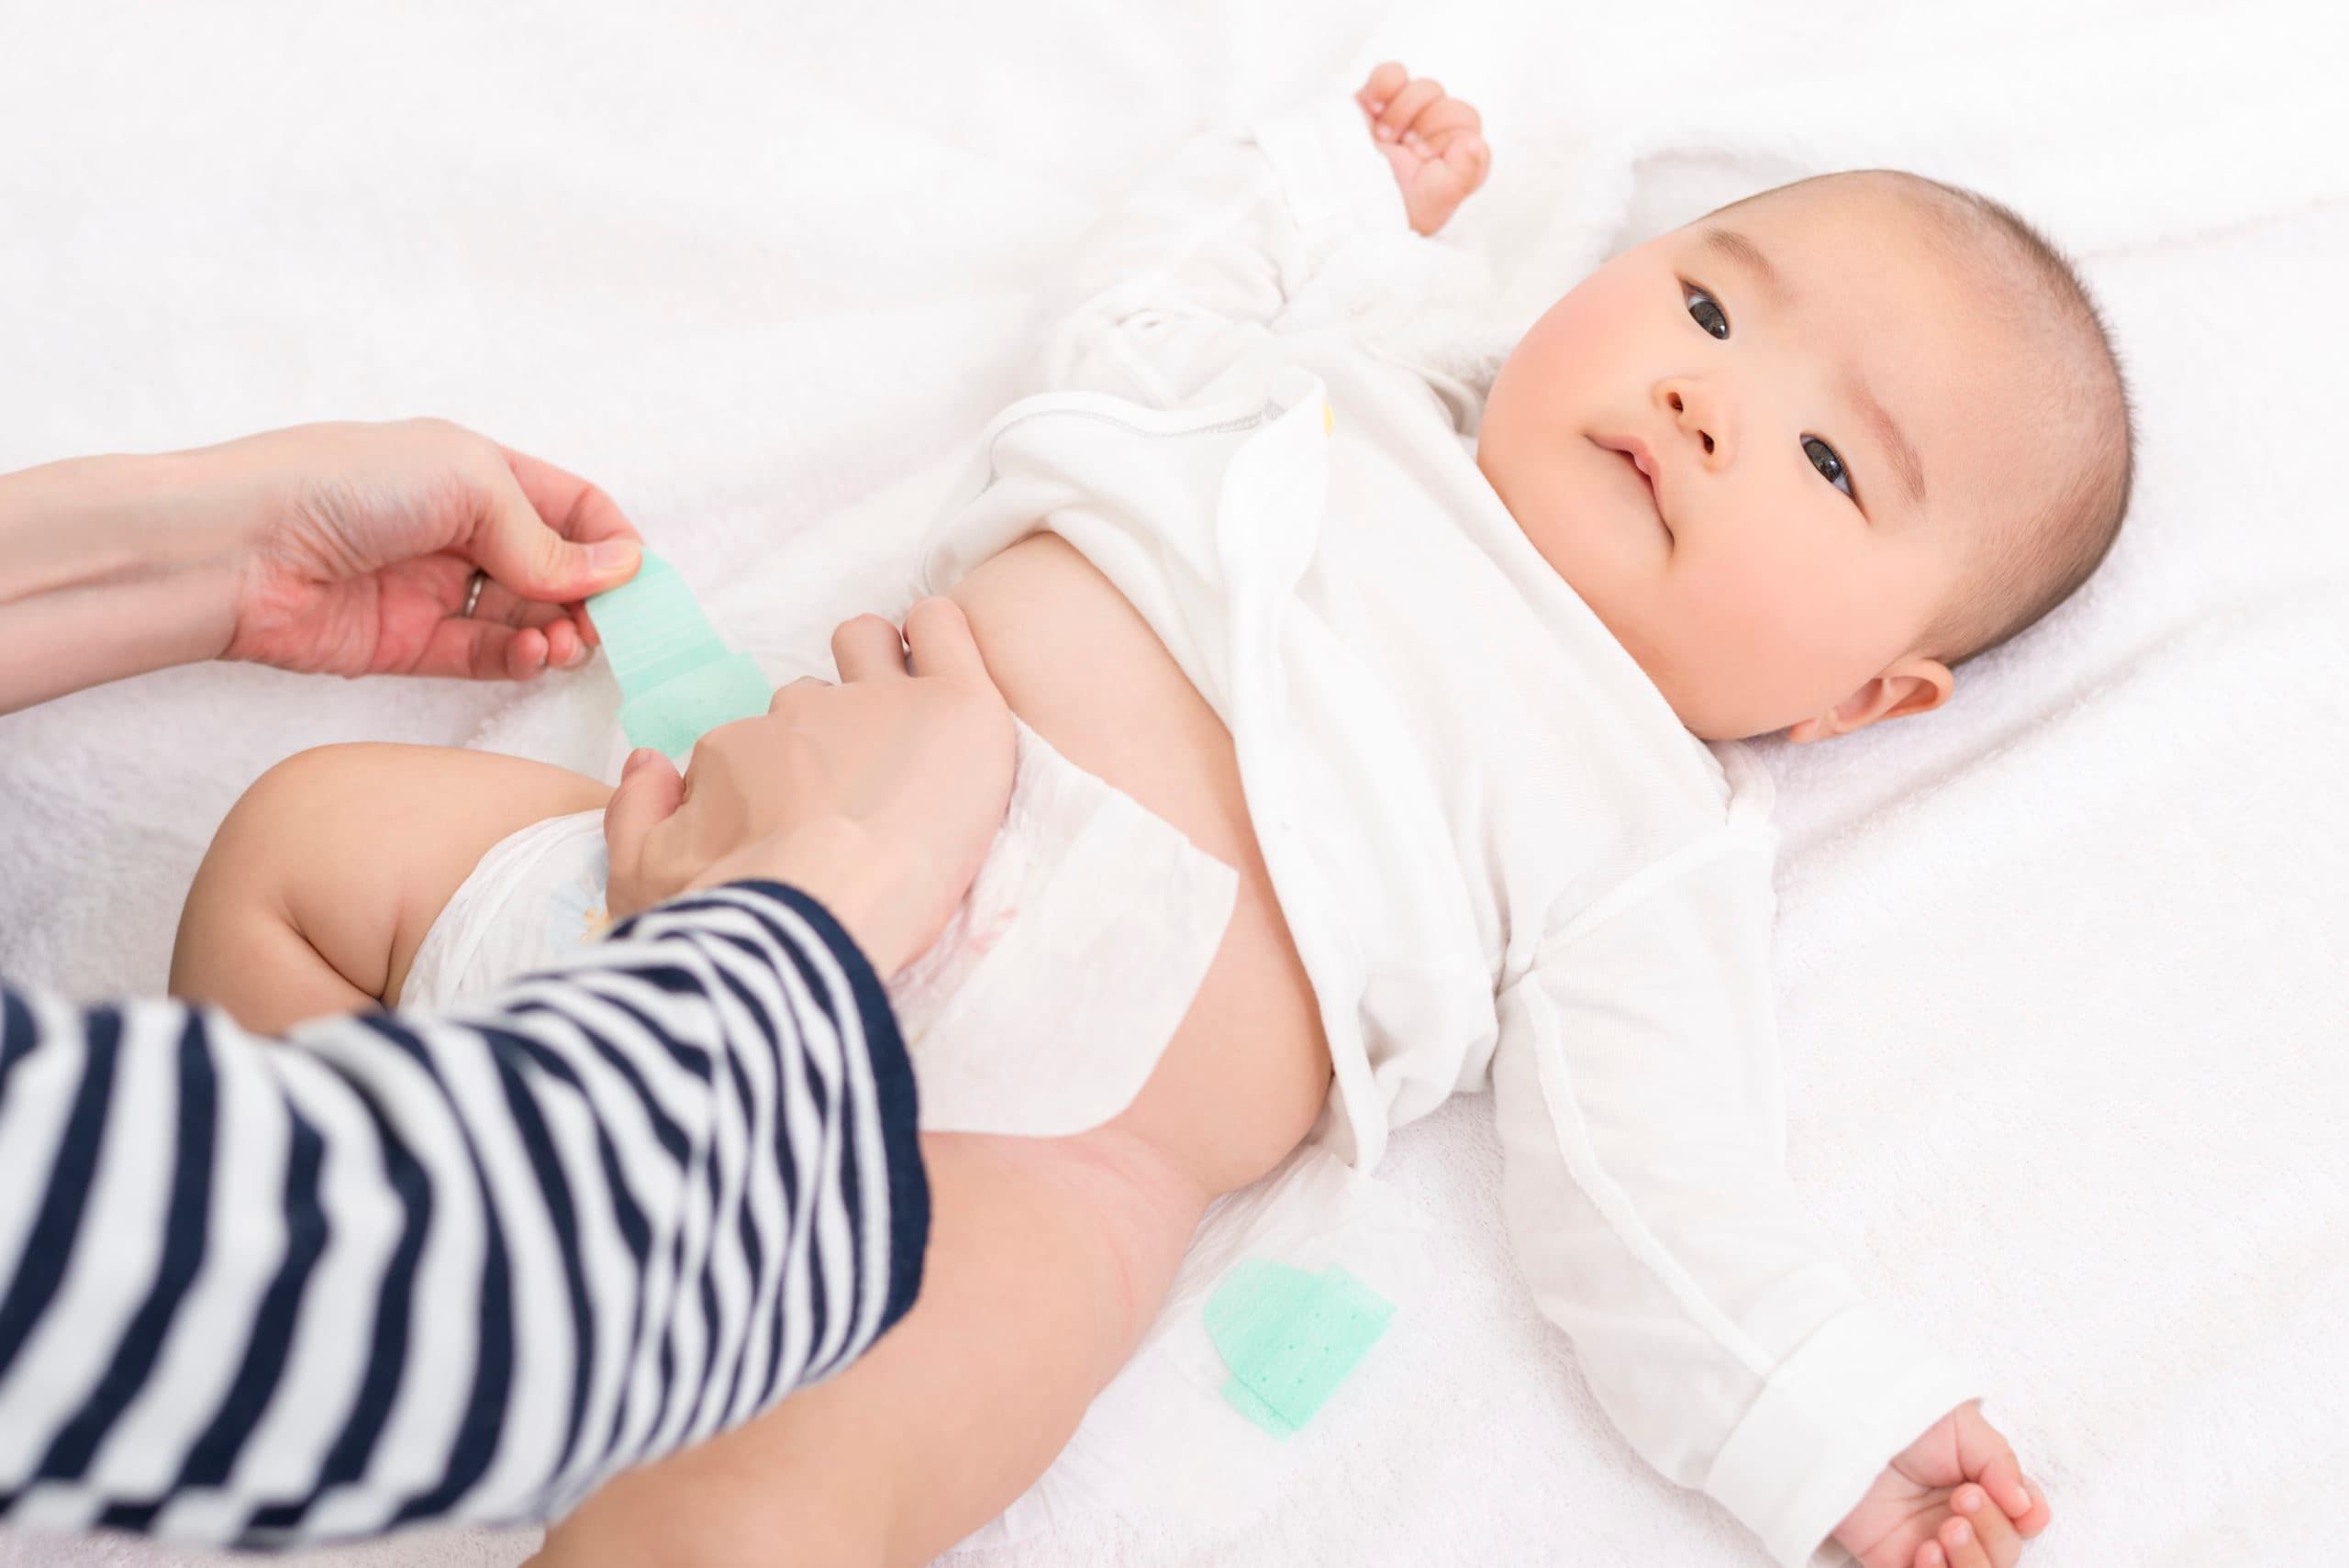 Diaper rash 101: A new parent’s guide to prevention and treatment